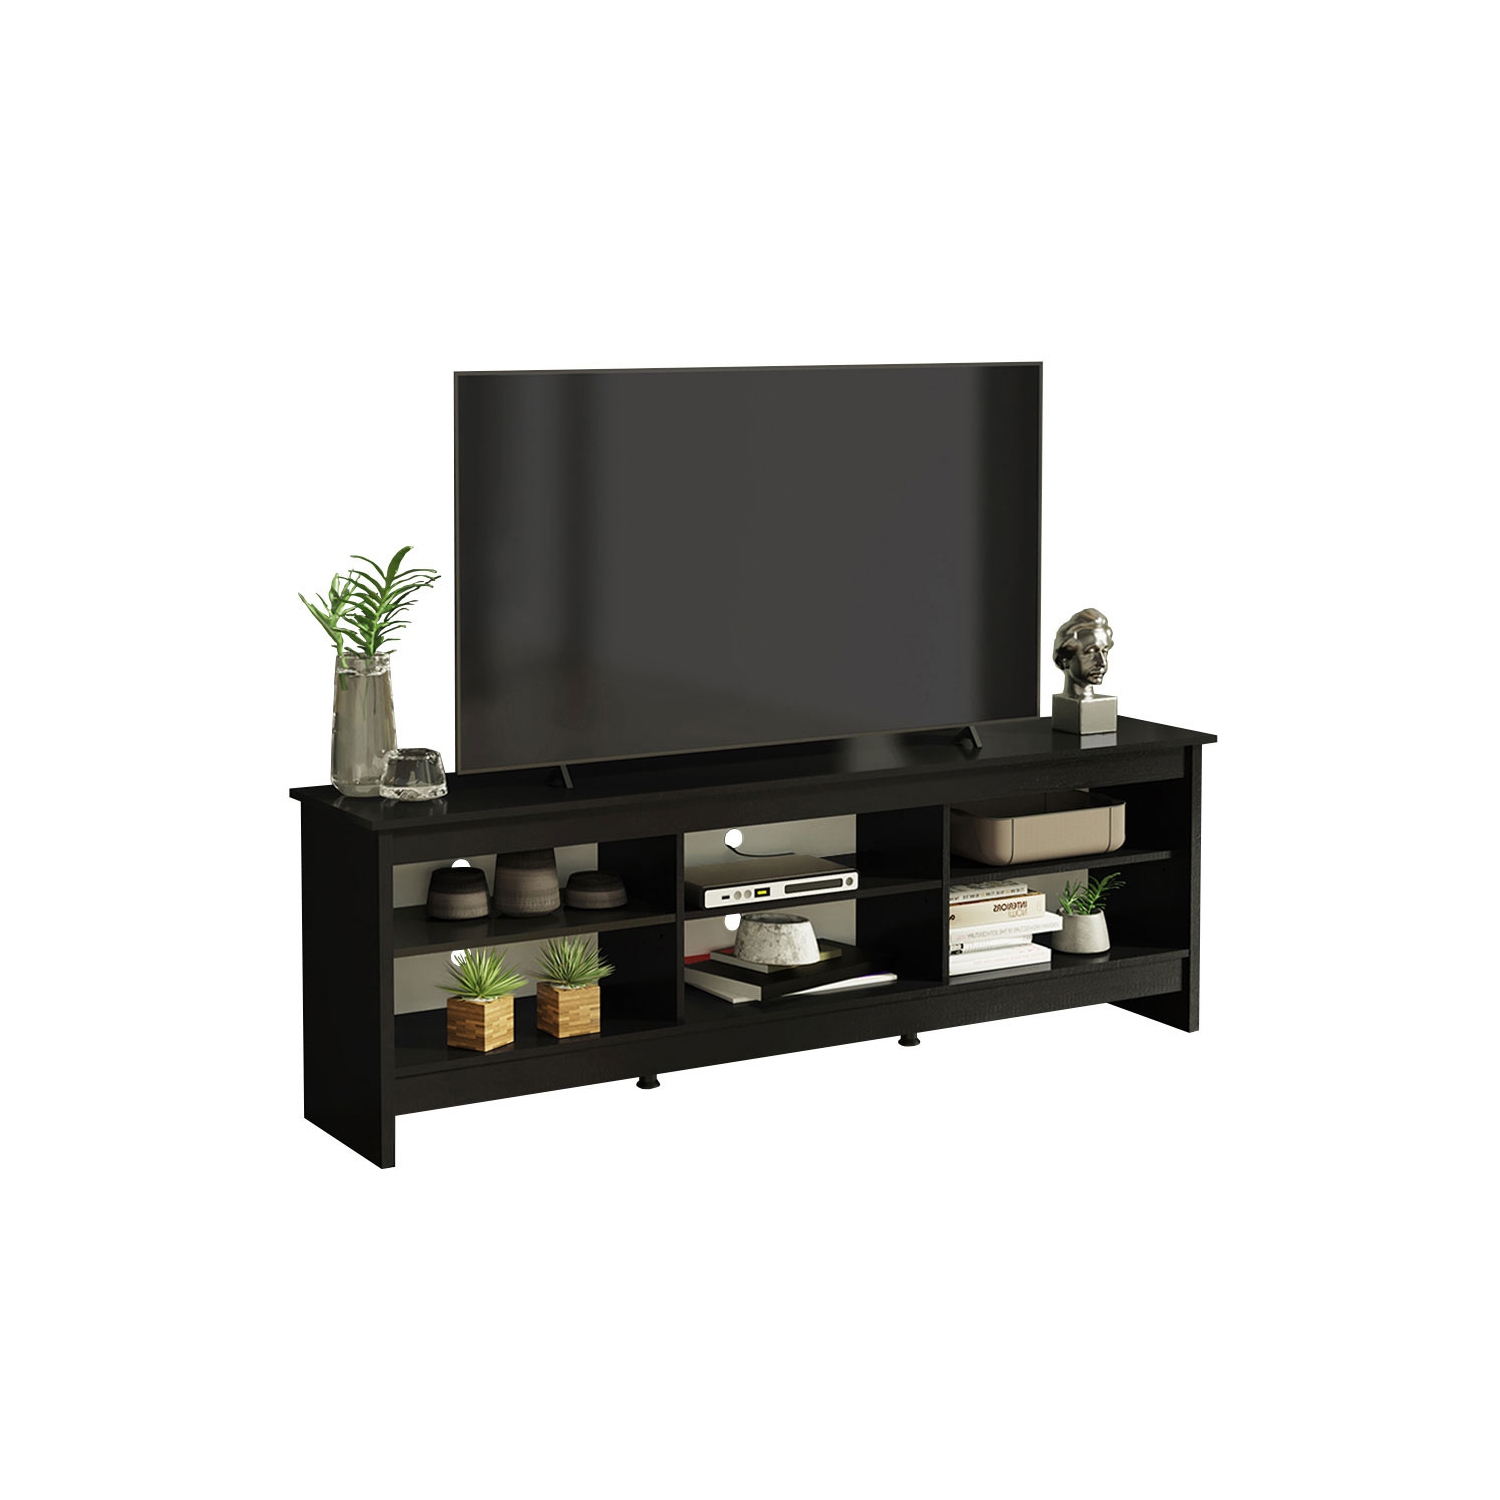 MADESA TV Stand with 6 Shelves and Cable Management, for TVs up to 75 Inches, Wood, 23” H x 15" D x 70” L – Black